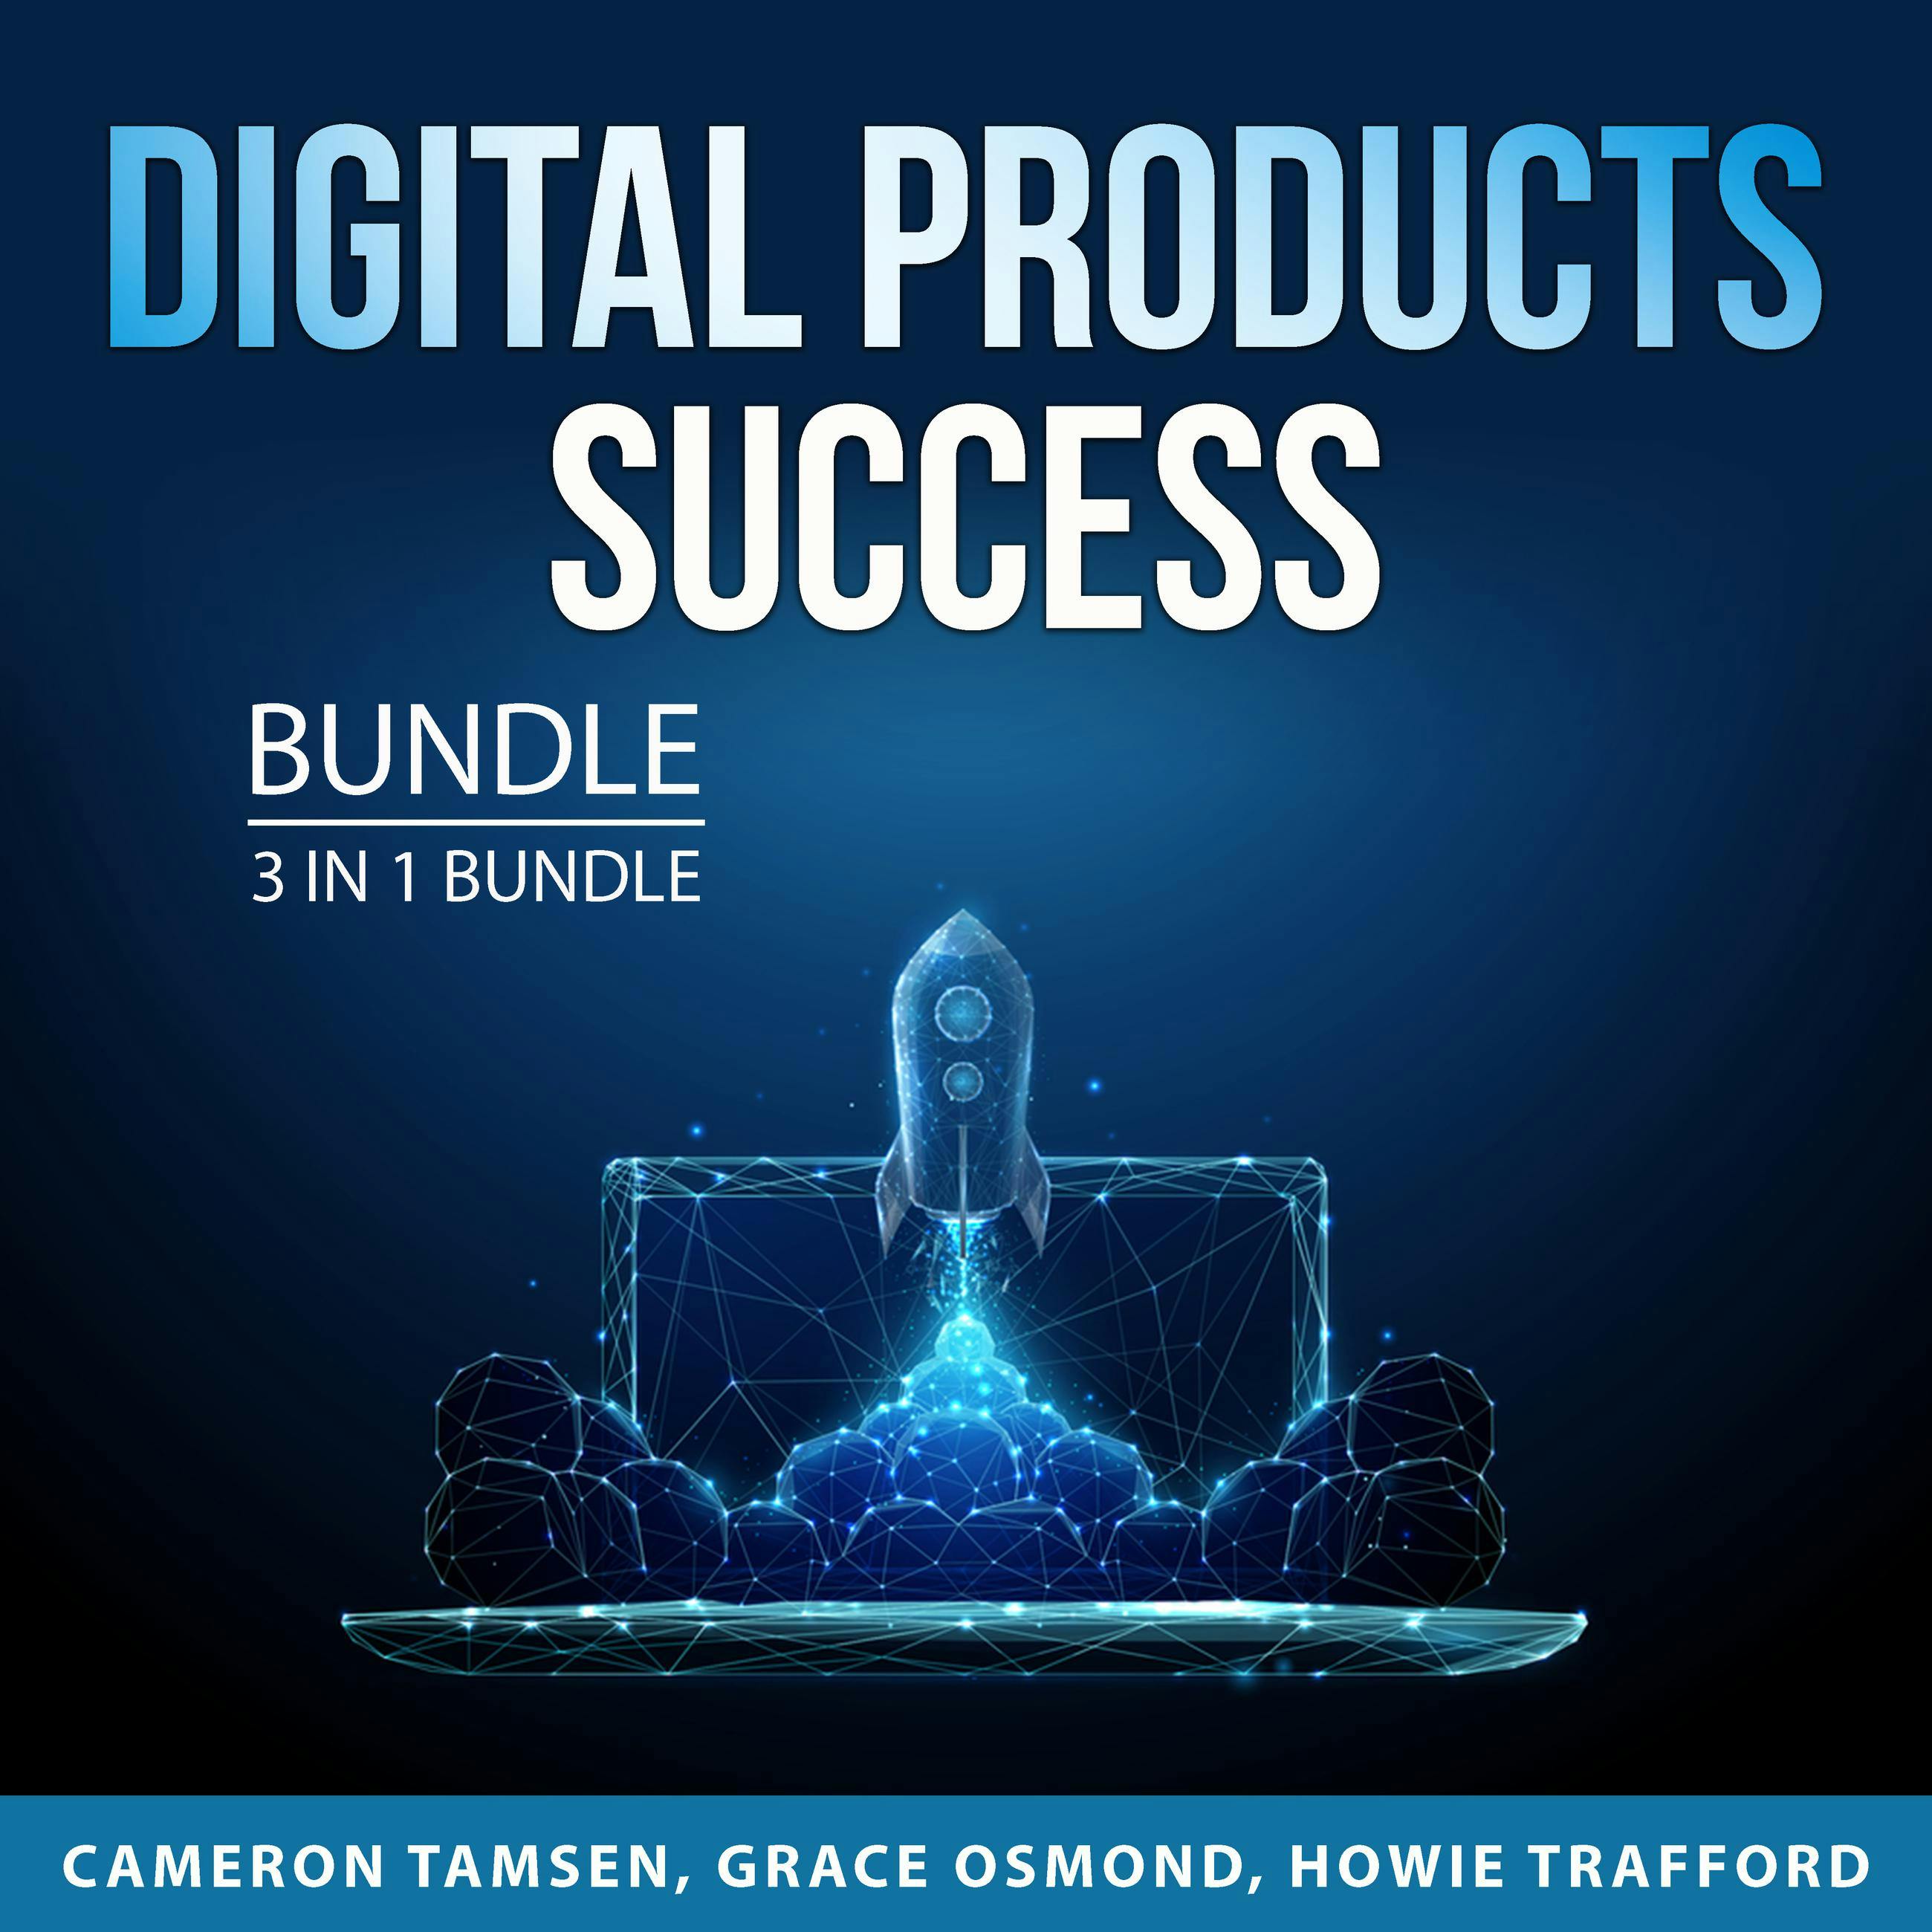 Digital Products Success Bundle, 3 in 1 Bundle: Digital Product Development, Digital Product Success, and How to Create a Bestseller - undefined